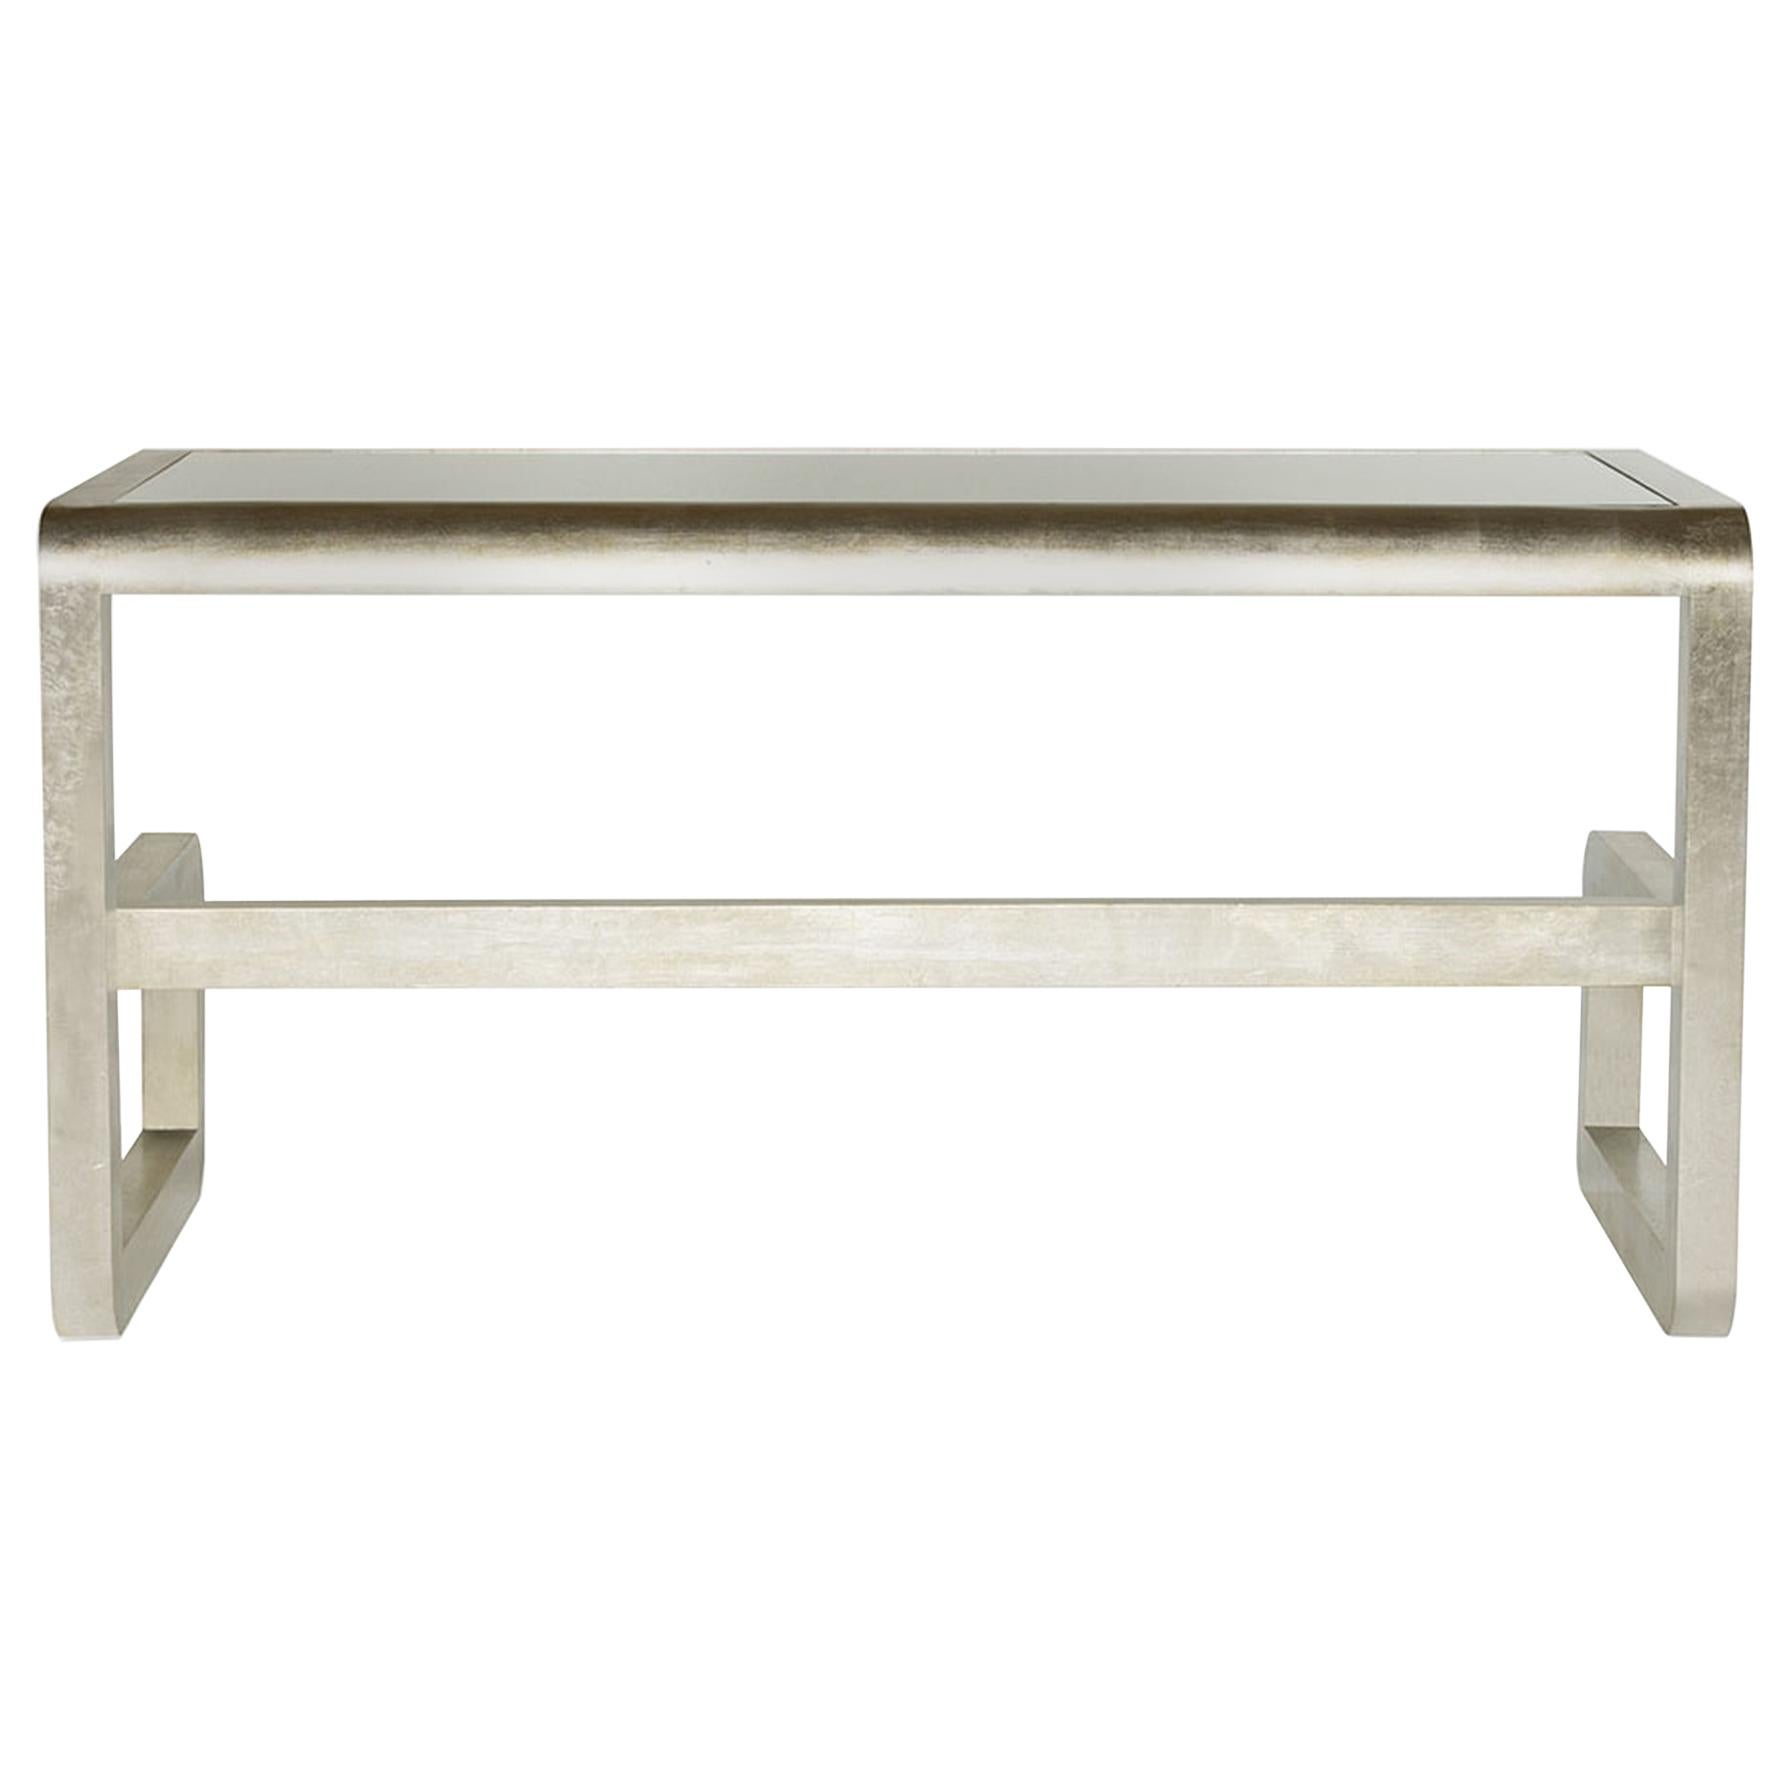 Mulholland Desk in Antique Silver and Glass by Innova Luxuxy Group For Sale